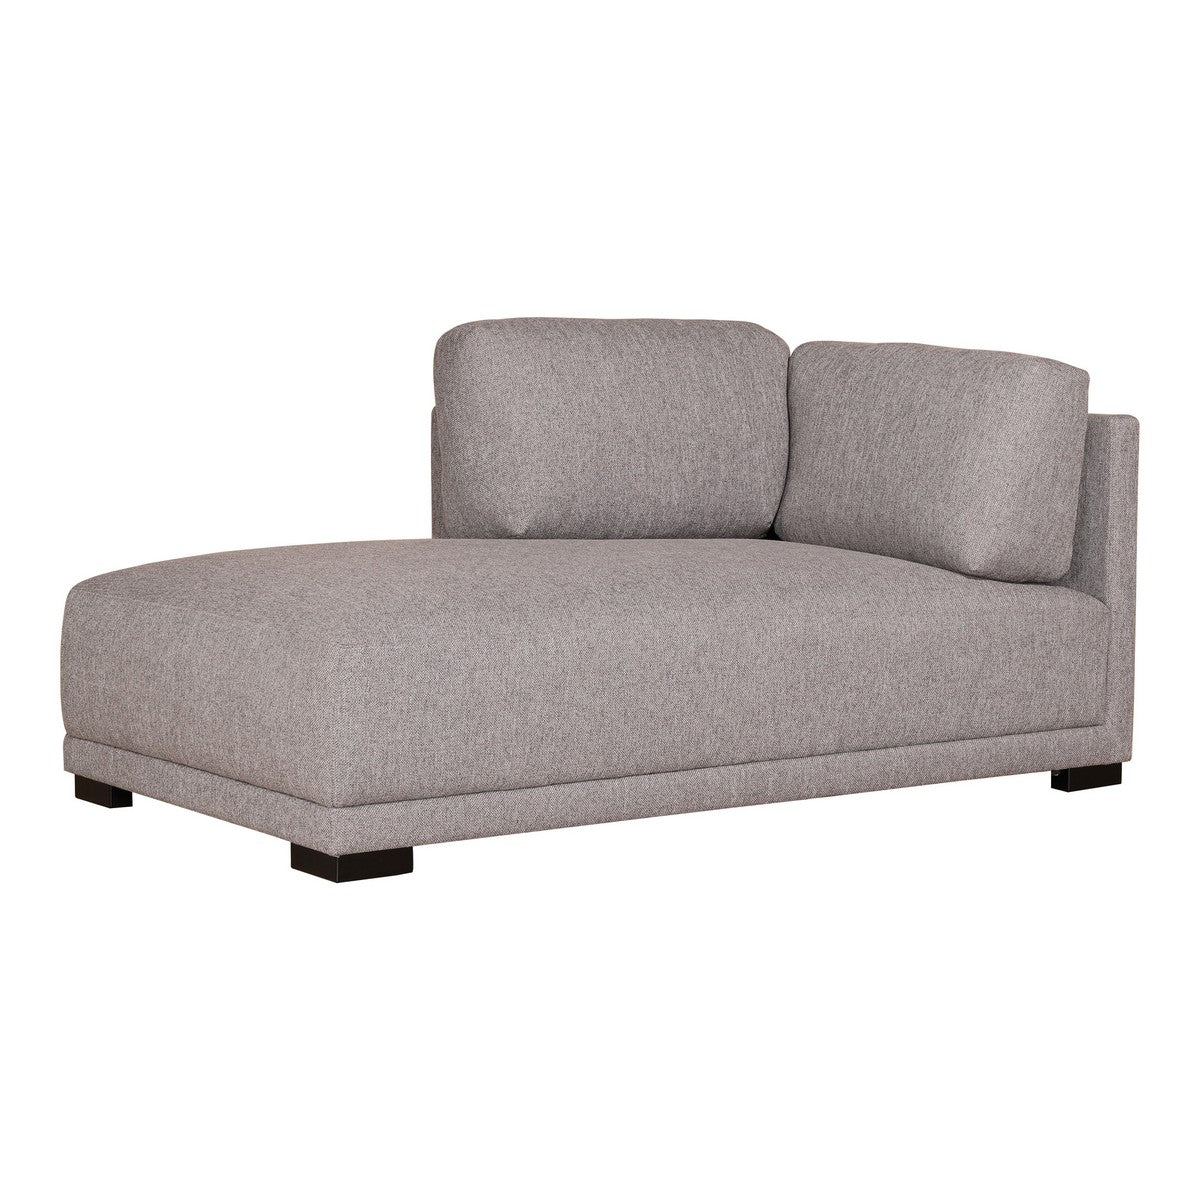 Moe's Home Collection Romeo Chaise Left Grey - RN-1117-29